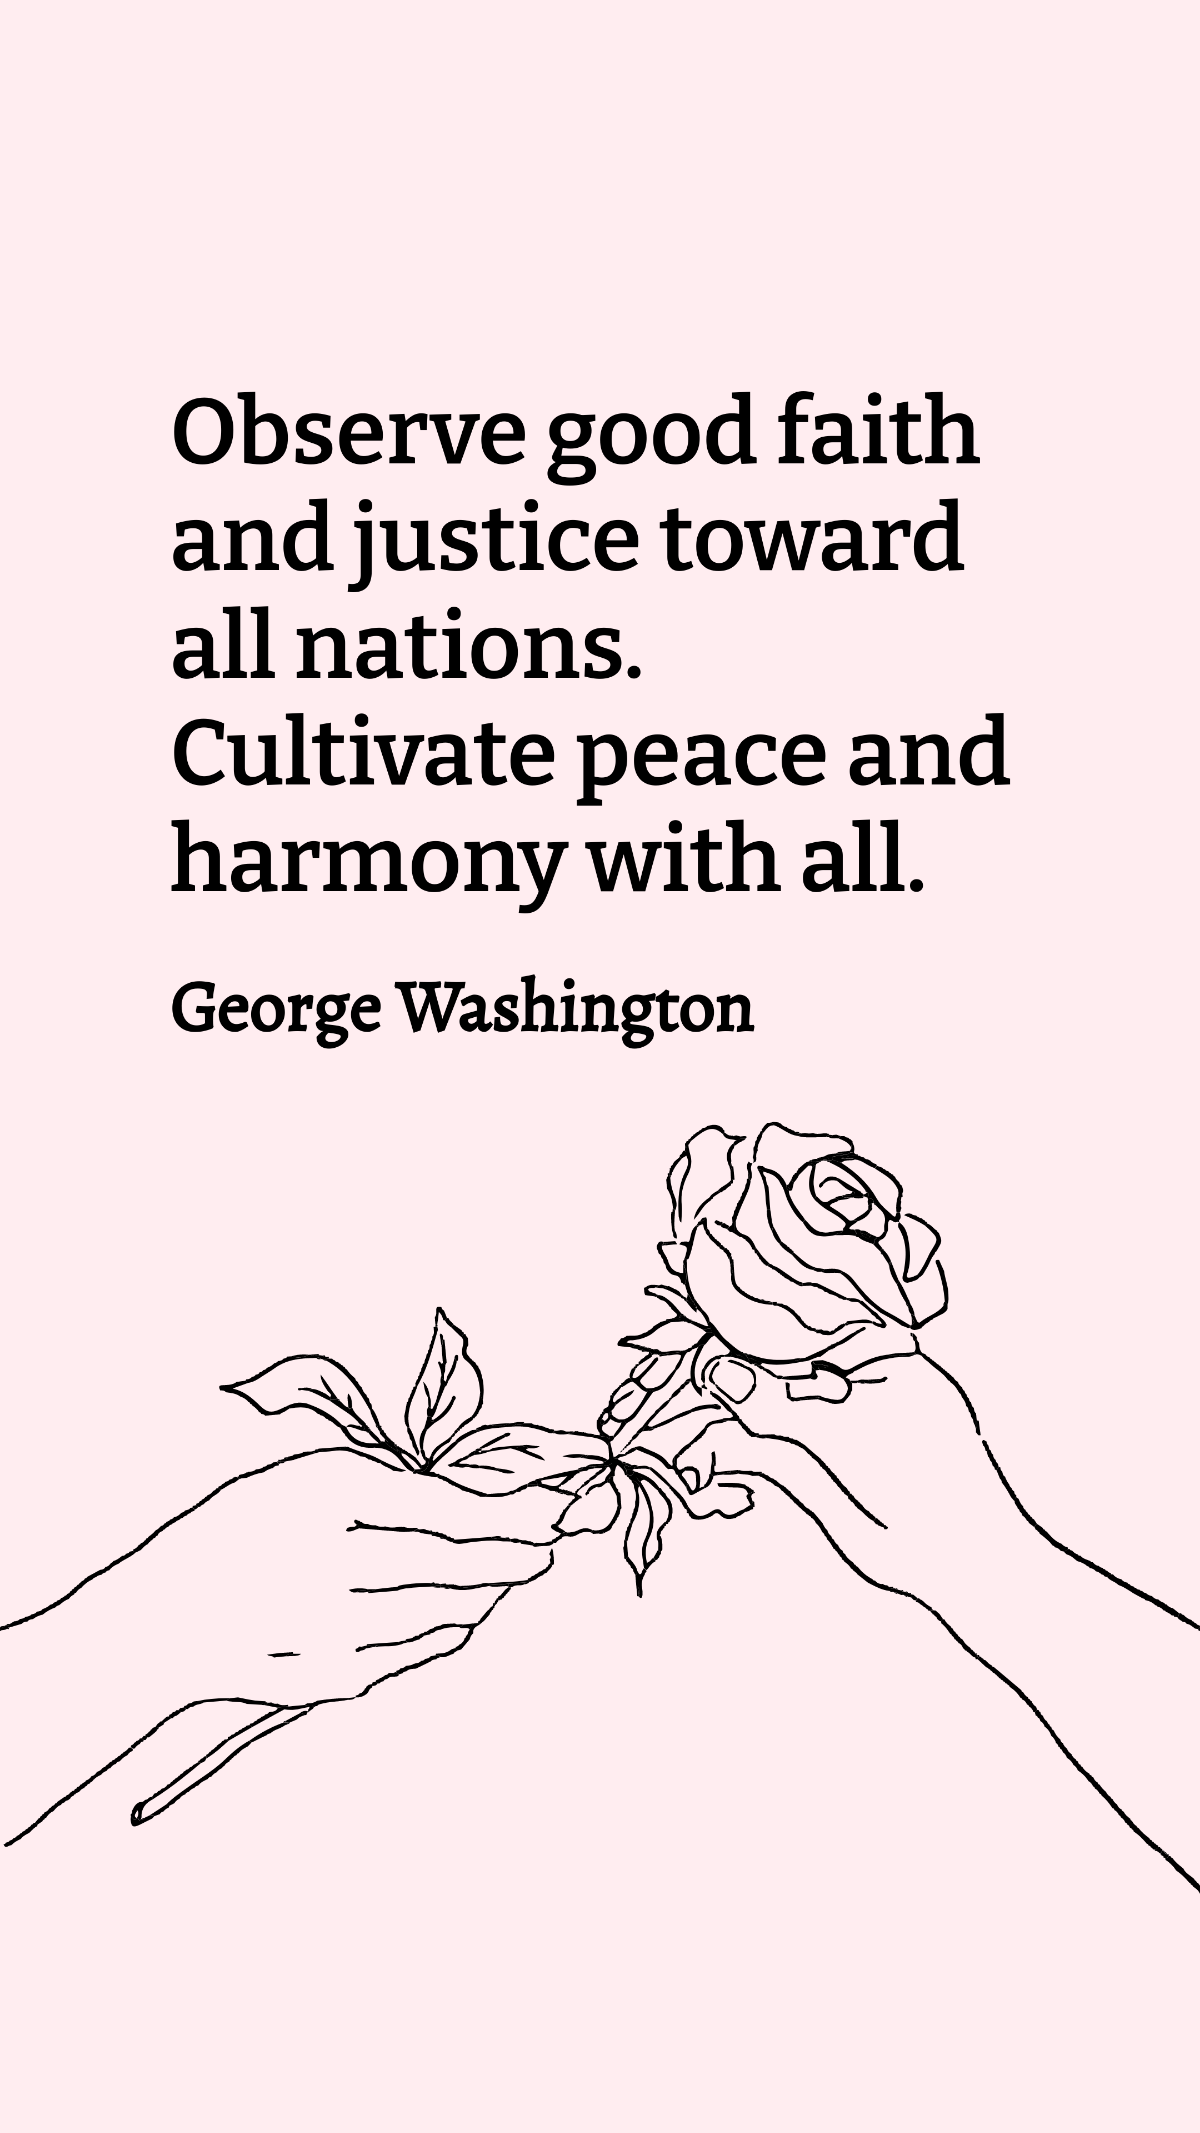 George Washington - Observe good faith and justice toward all nations. Cultivate peace and harmony with all.